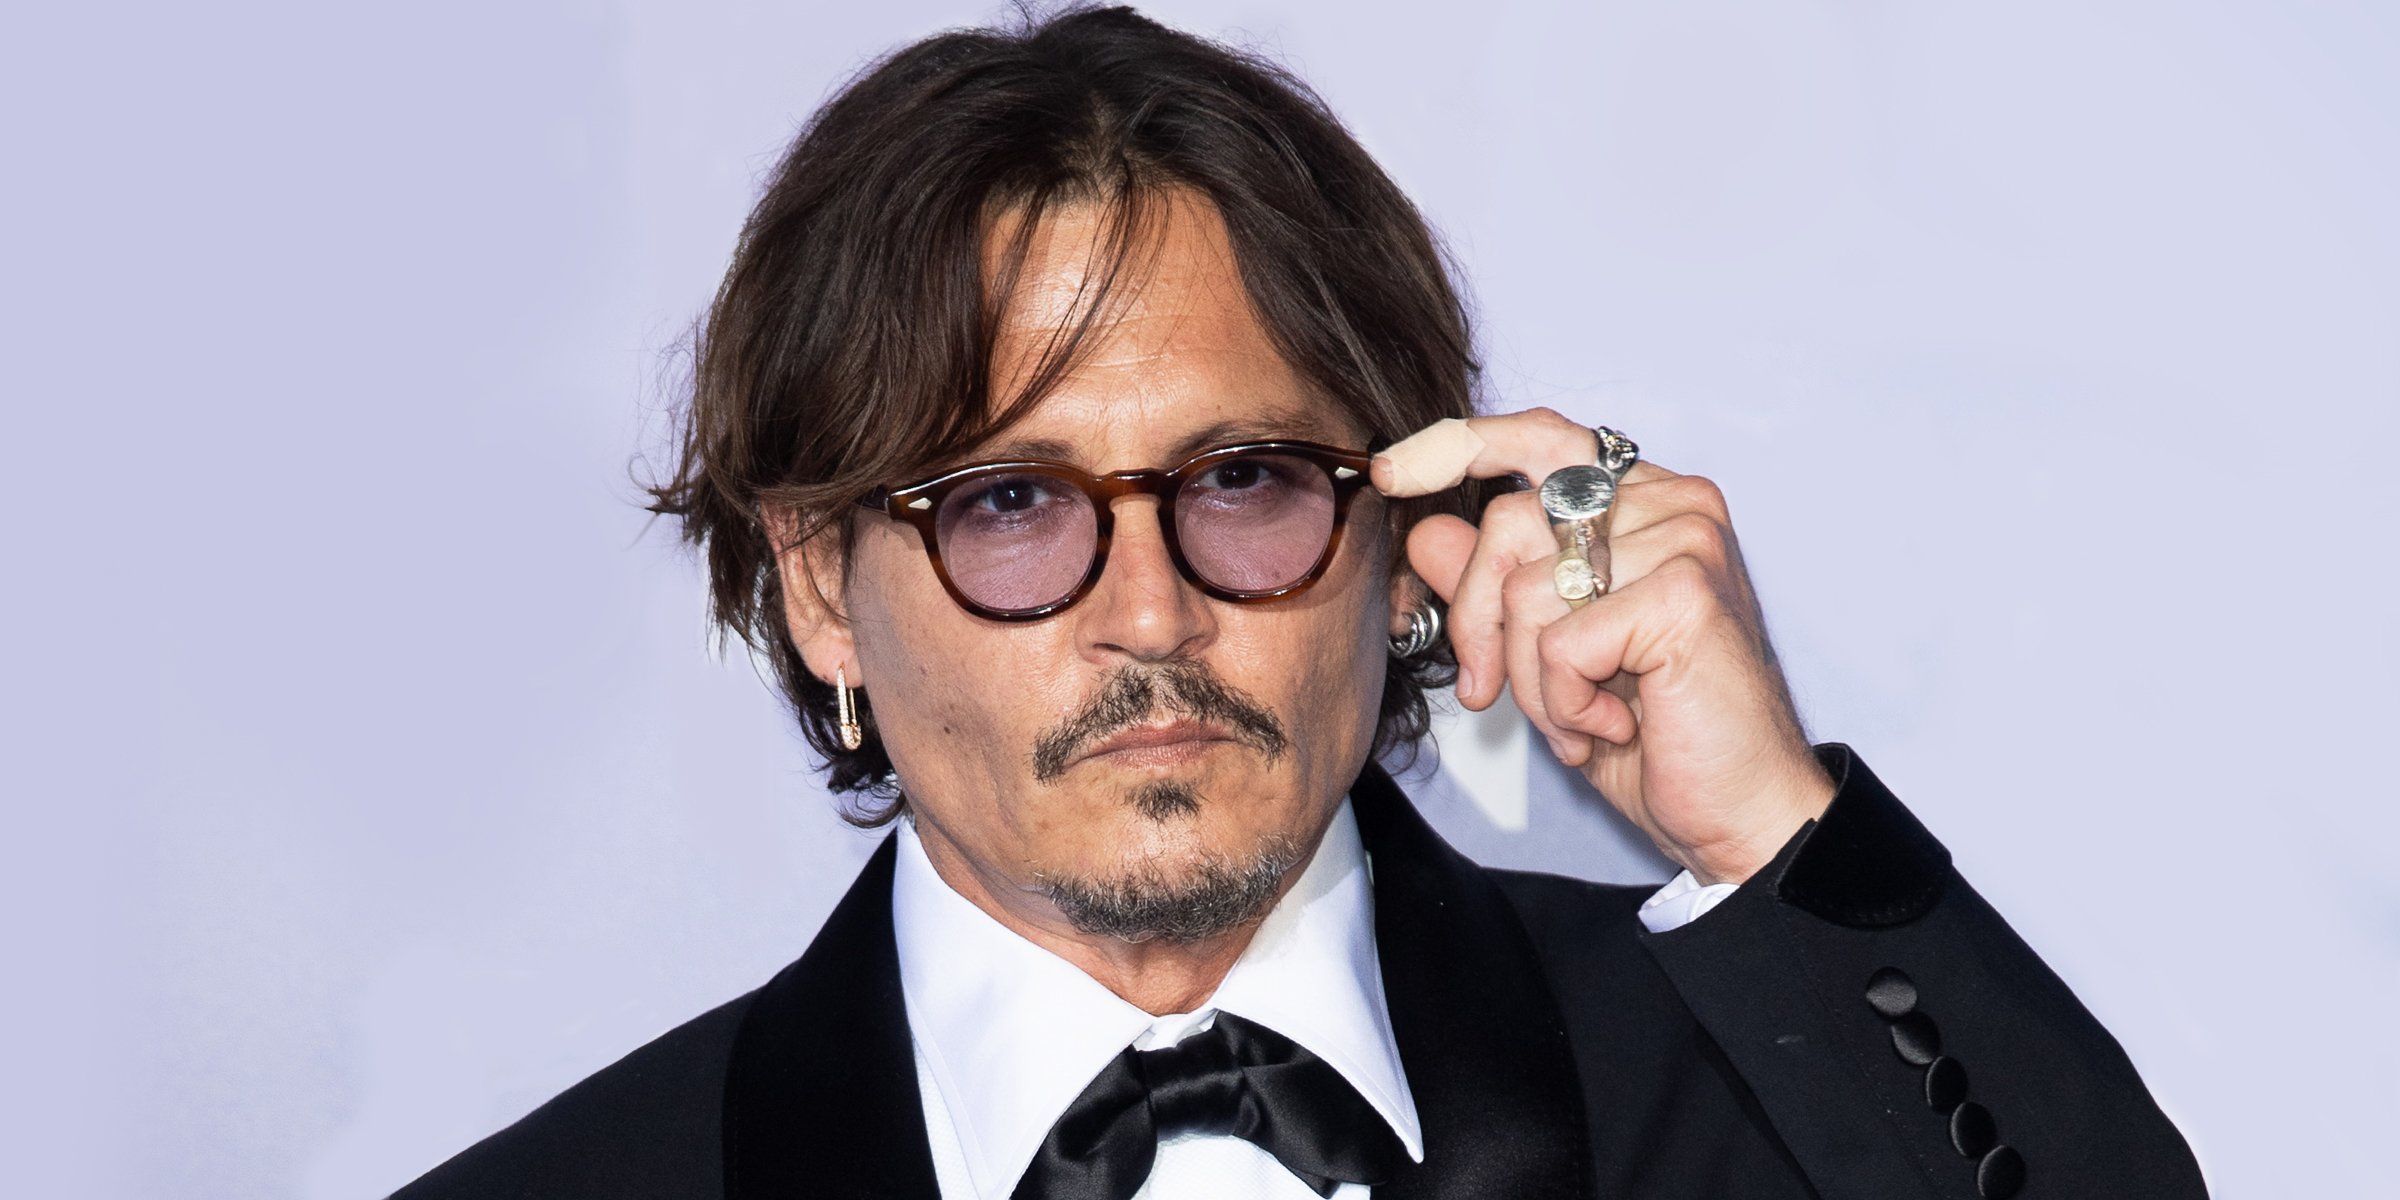 Johnny Depp Has 3 Siblings, 2 of Whom Are Also Involved in the Movie ...